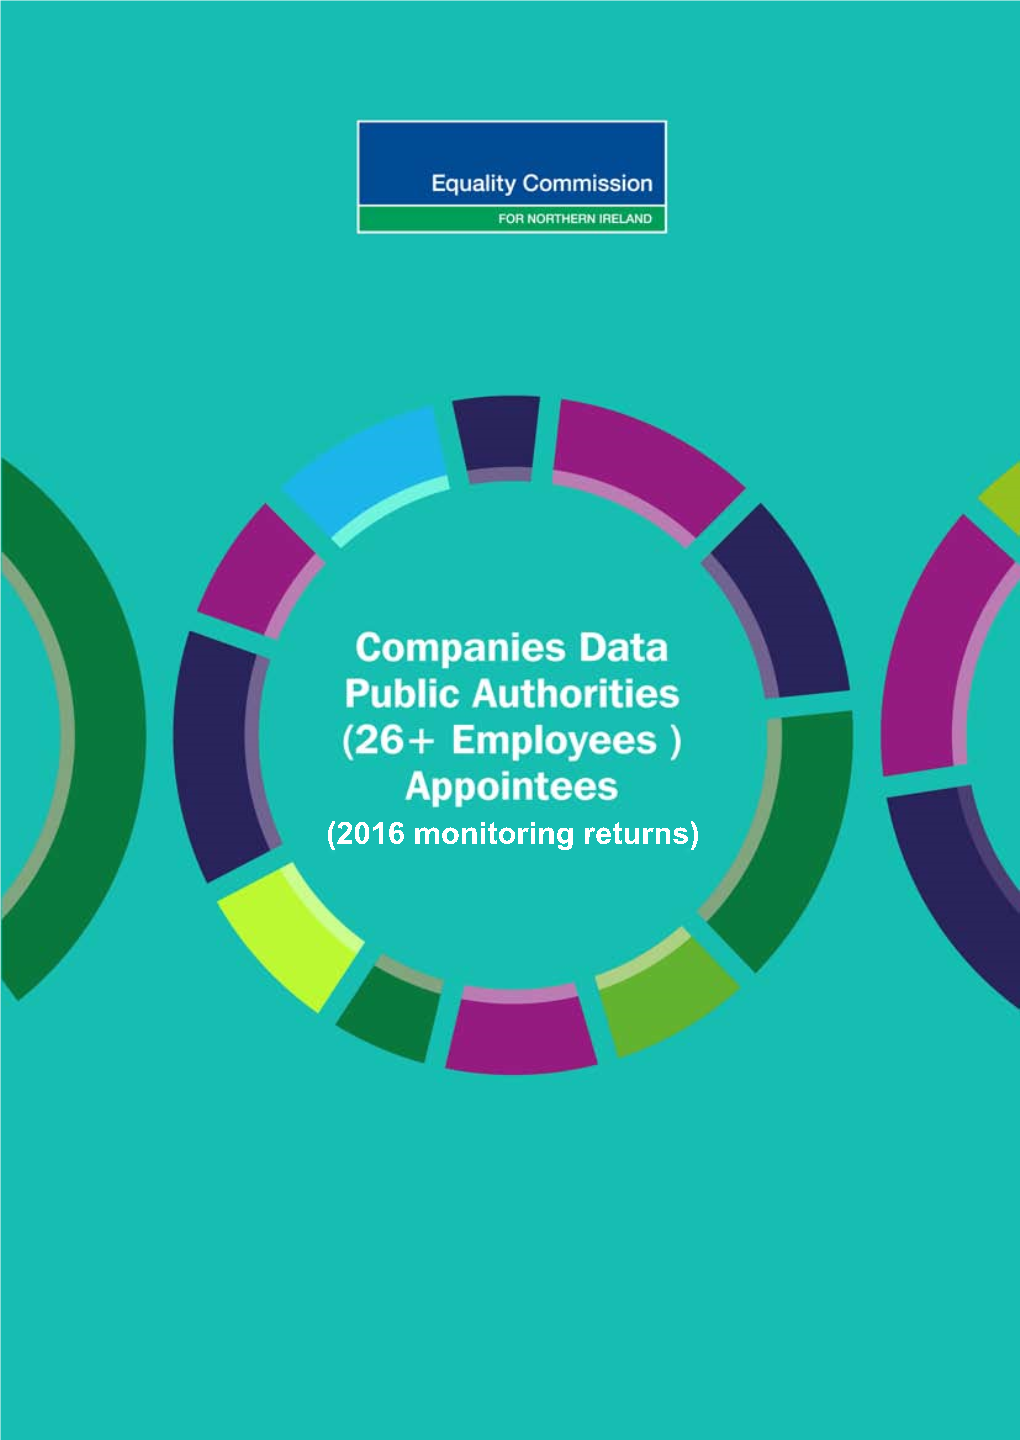 Companies Data Public Authorities Appointees